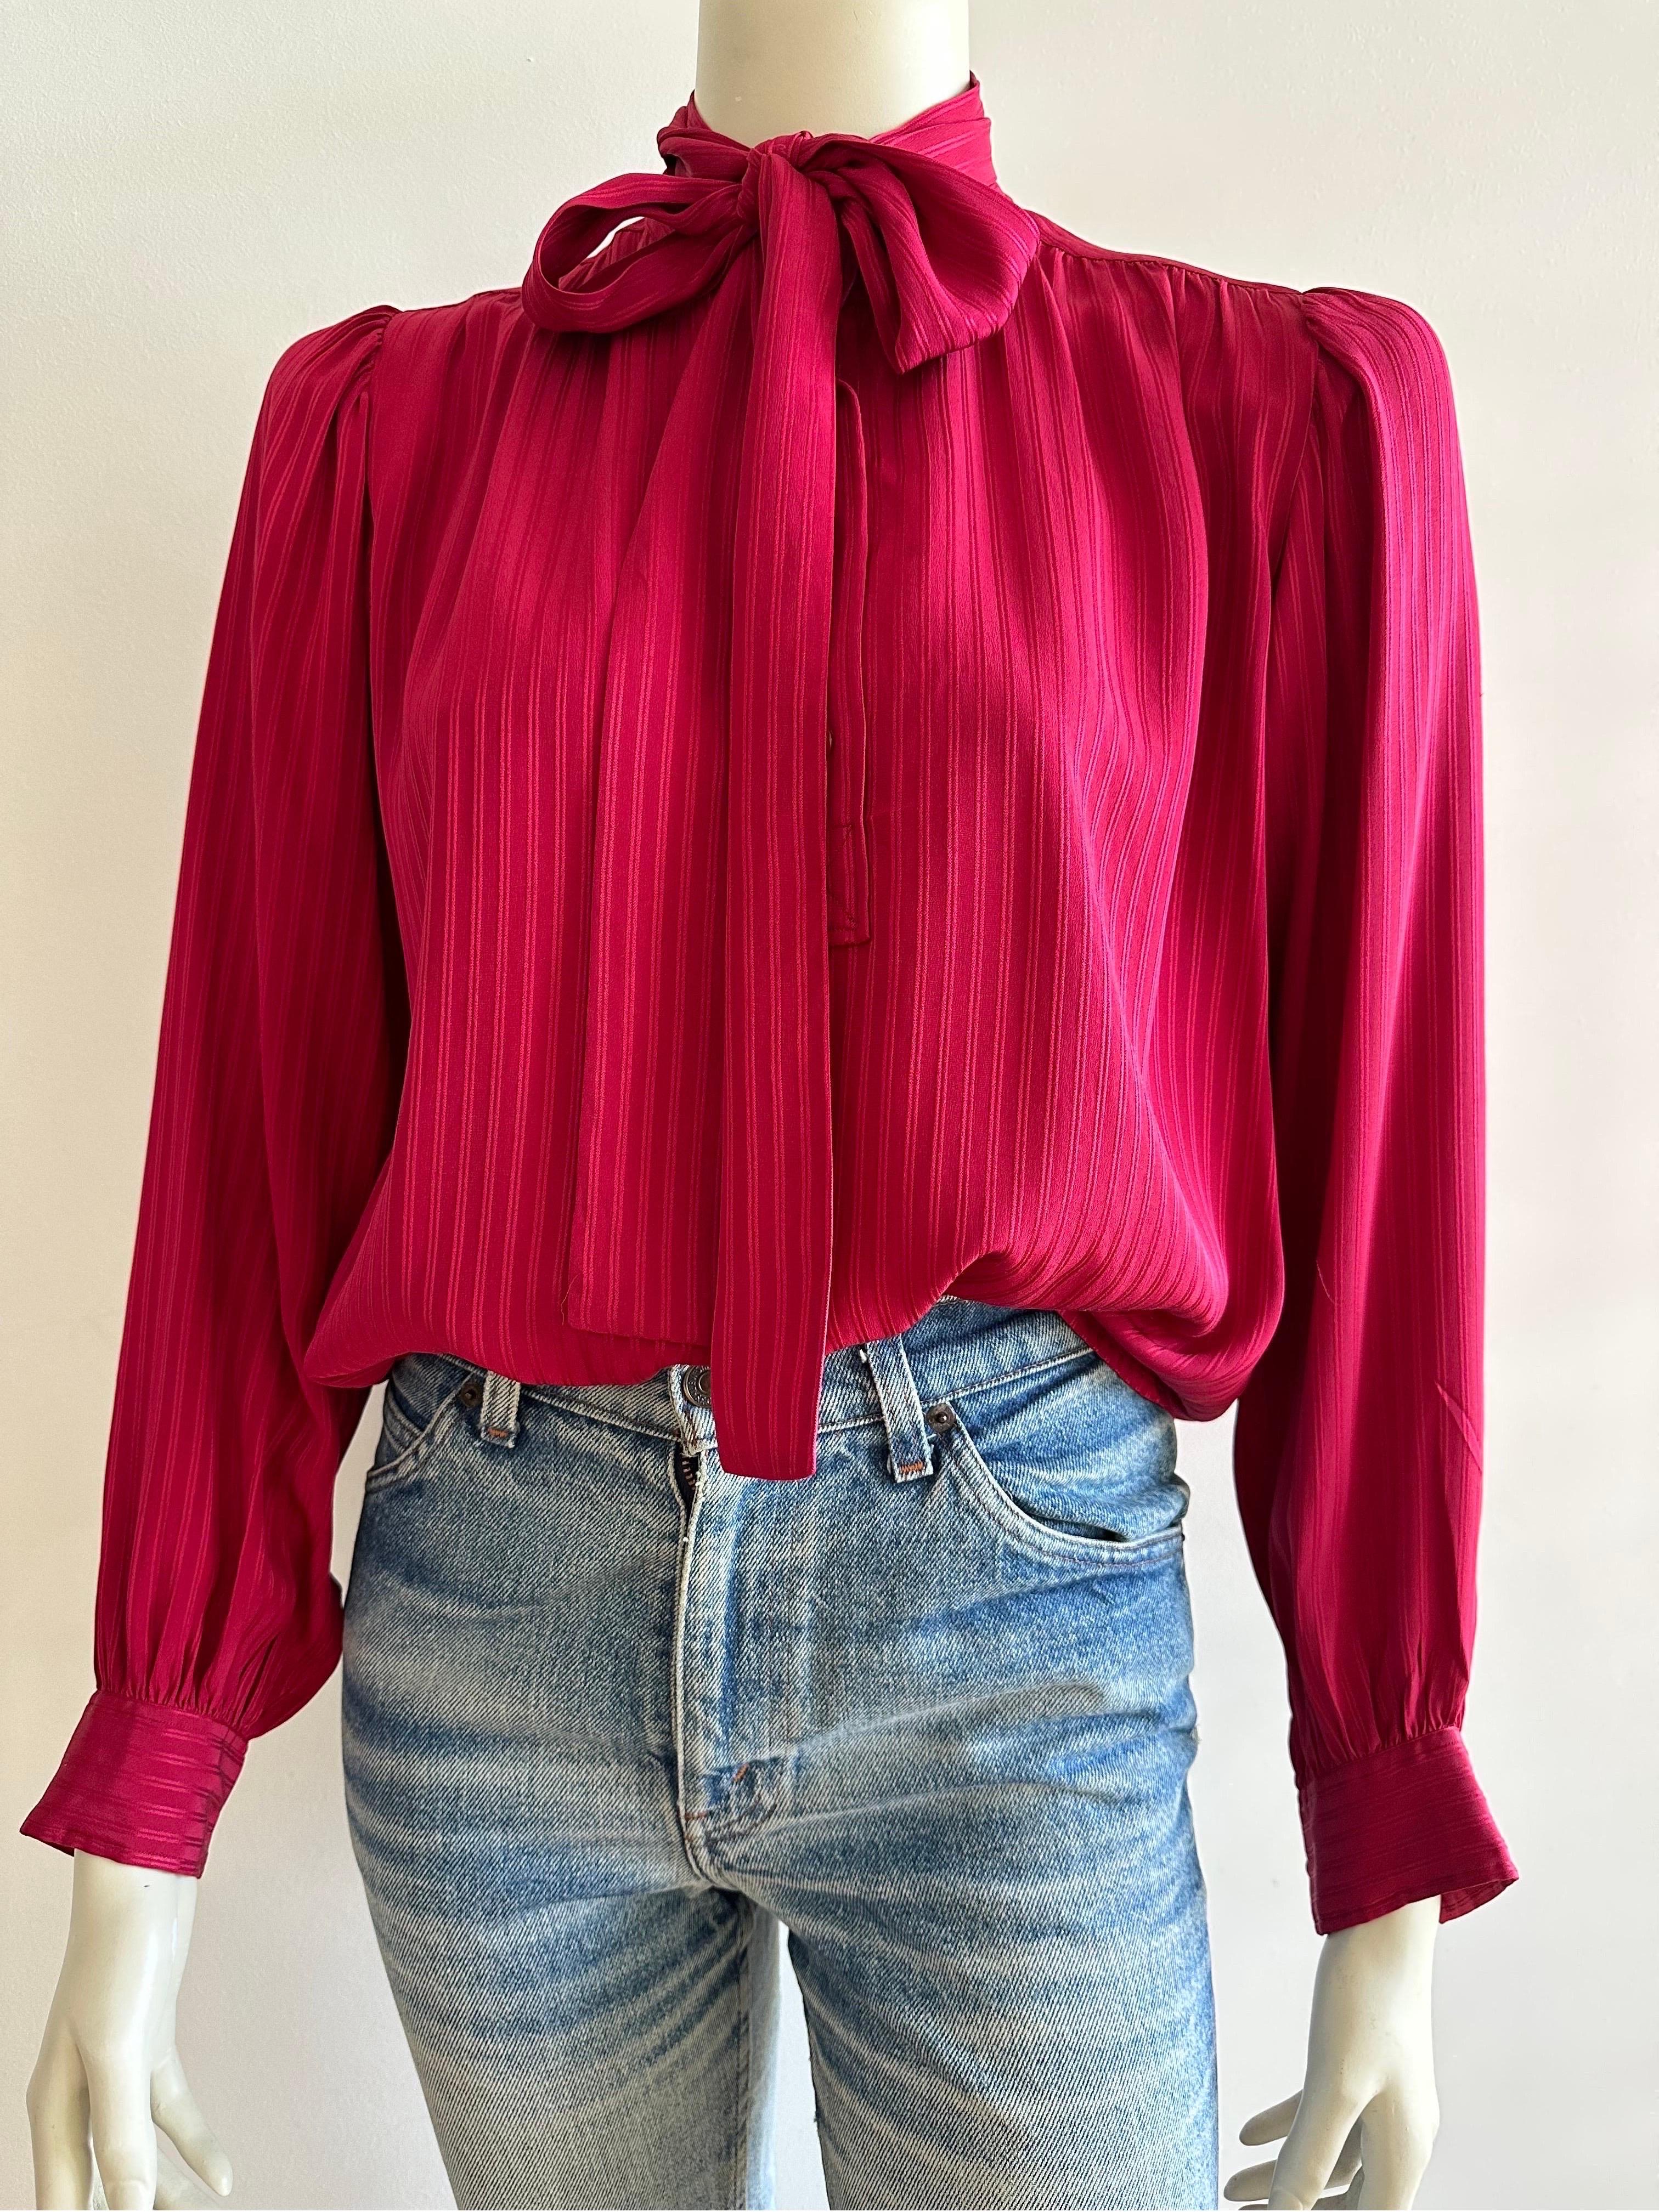 YSL Yves saint Laurent lavalliere blouse in red silk  For Sale 4